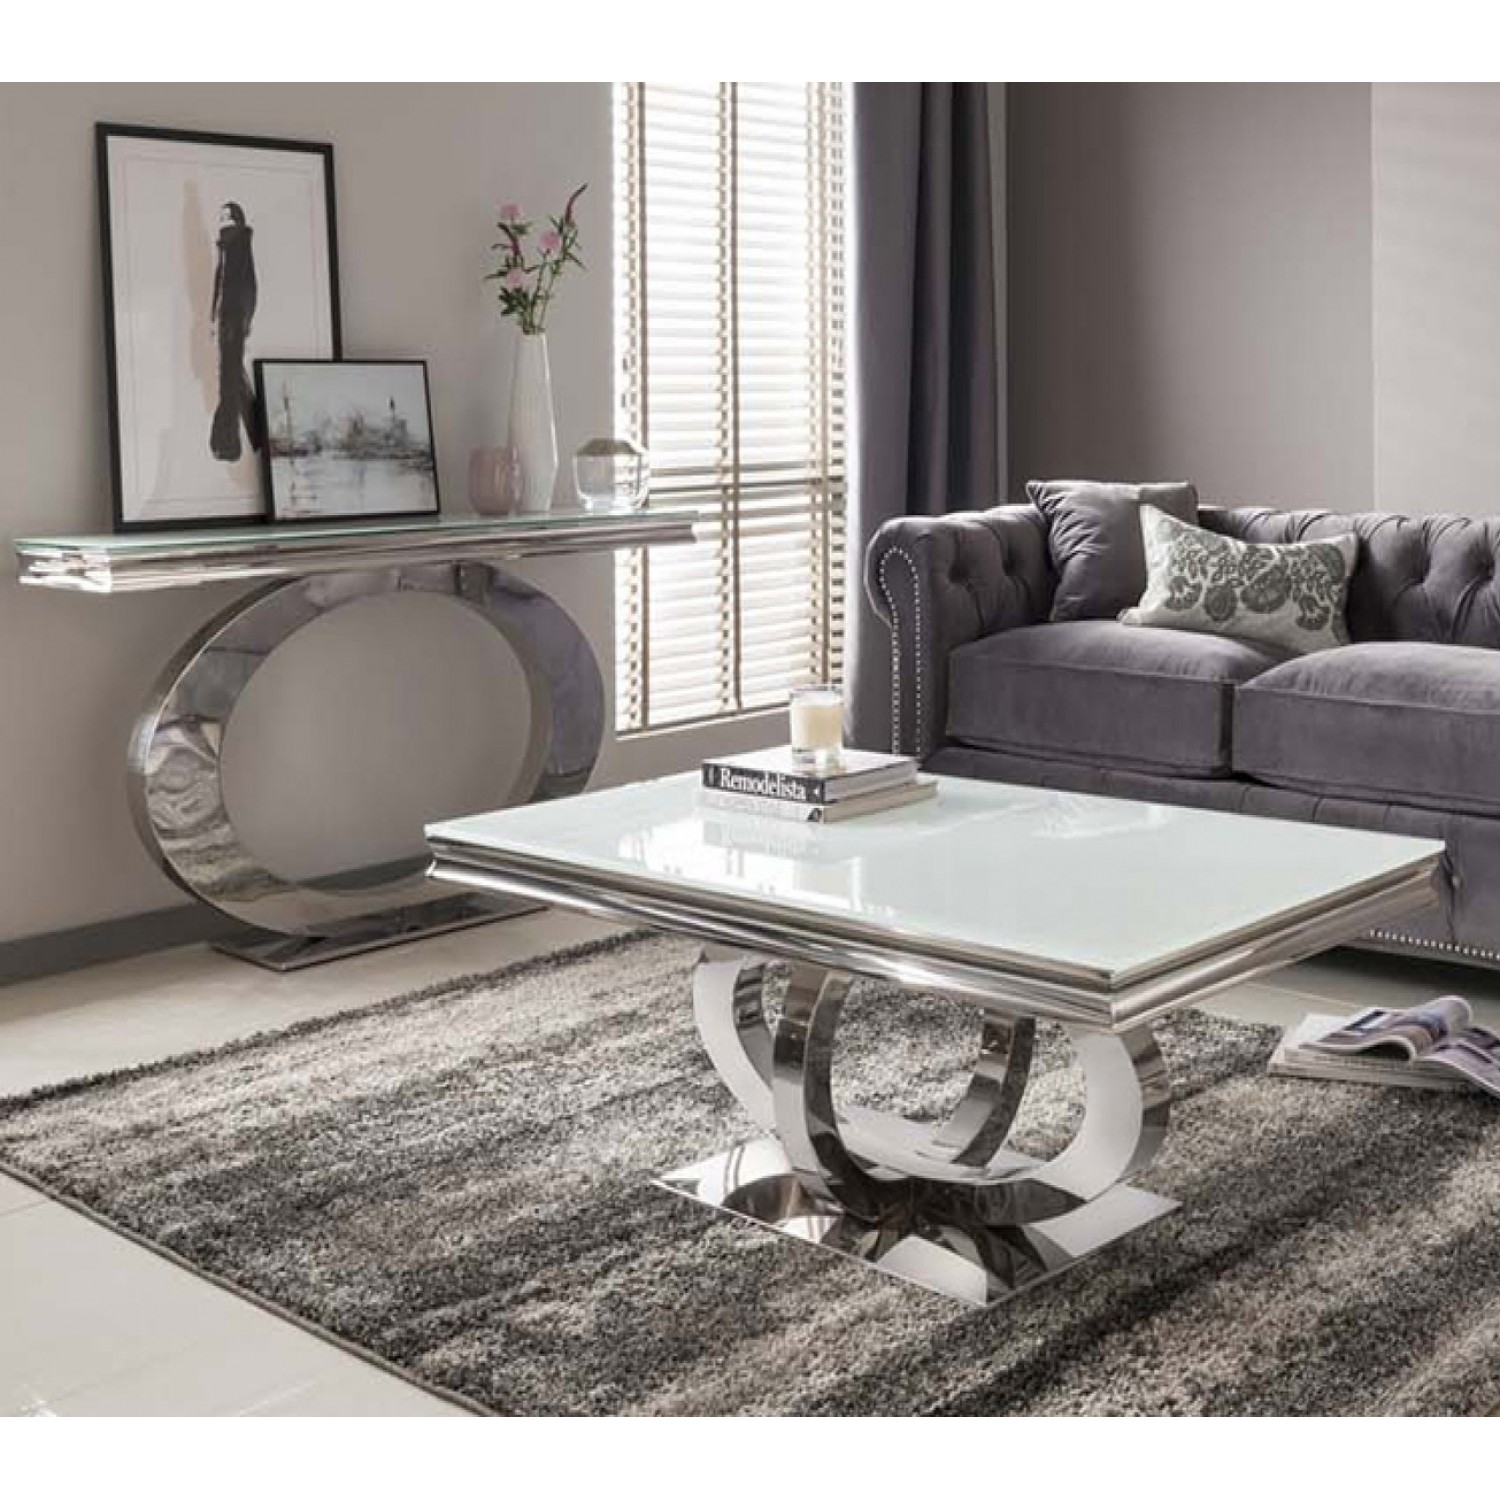 Vida Living Orion Chrome Glass, Matching Console And Coffee Table